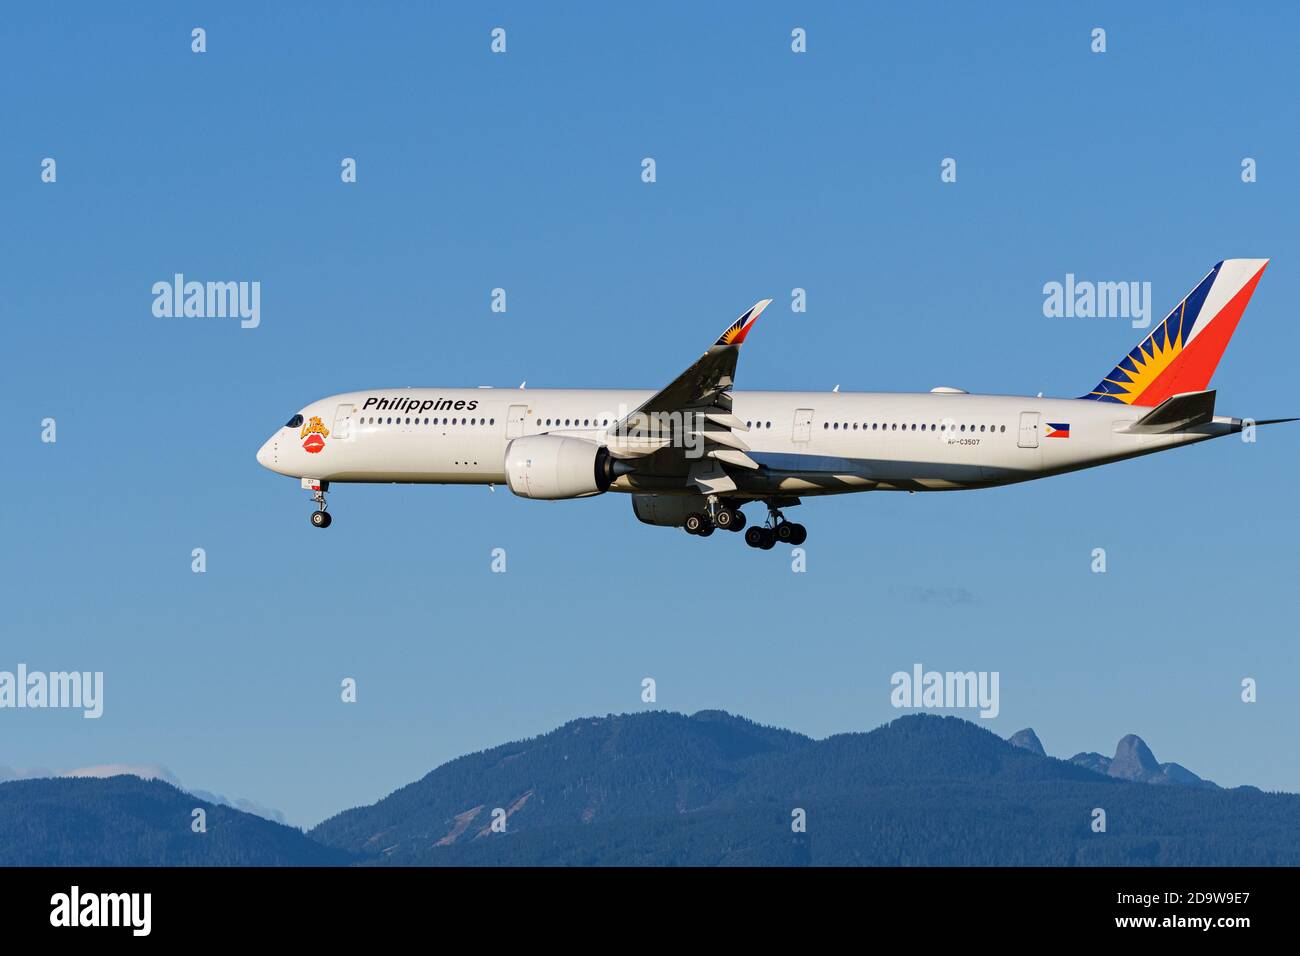 Richmond, British Columbia, Canada. 7th Nov, 2020. A Philippine Airlines Airbus A350-900 jet (RP-C3507) airborne on final approach for landing at Vancouver International Airport. Credit: Bayne Stanley/ZUMA Wire/Alamy Live News Stock Photo